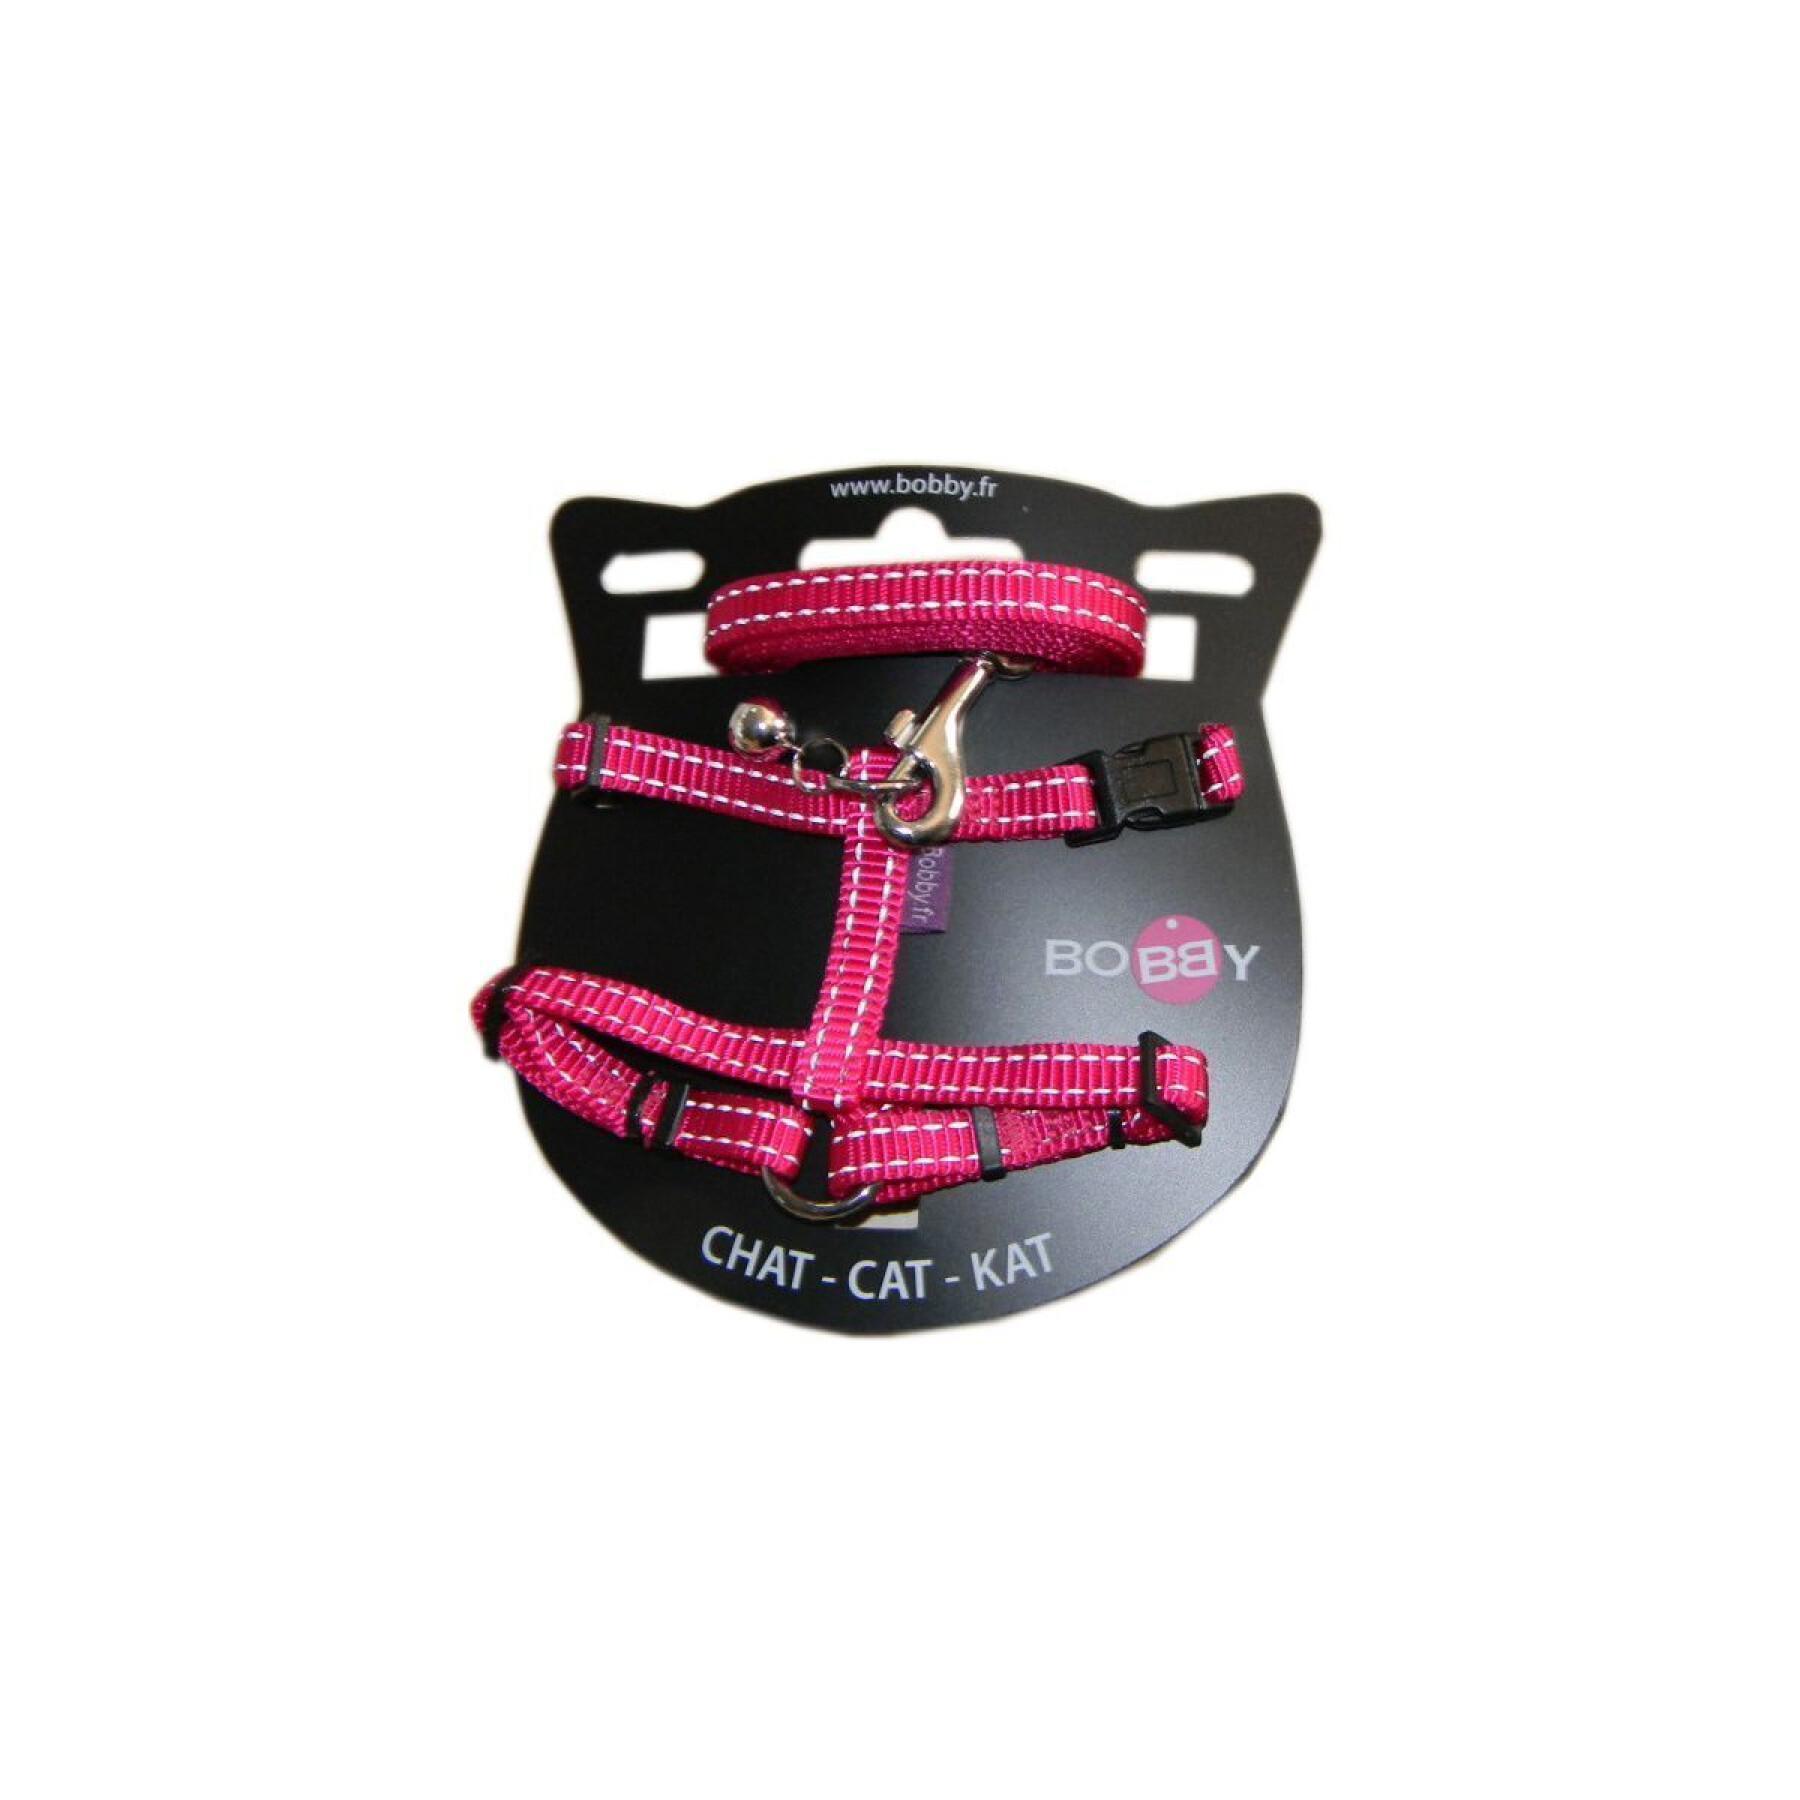 Cat harness with leash Bobby Safe